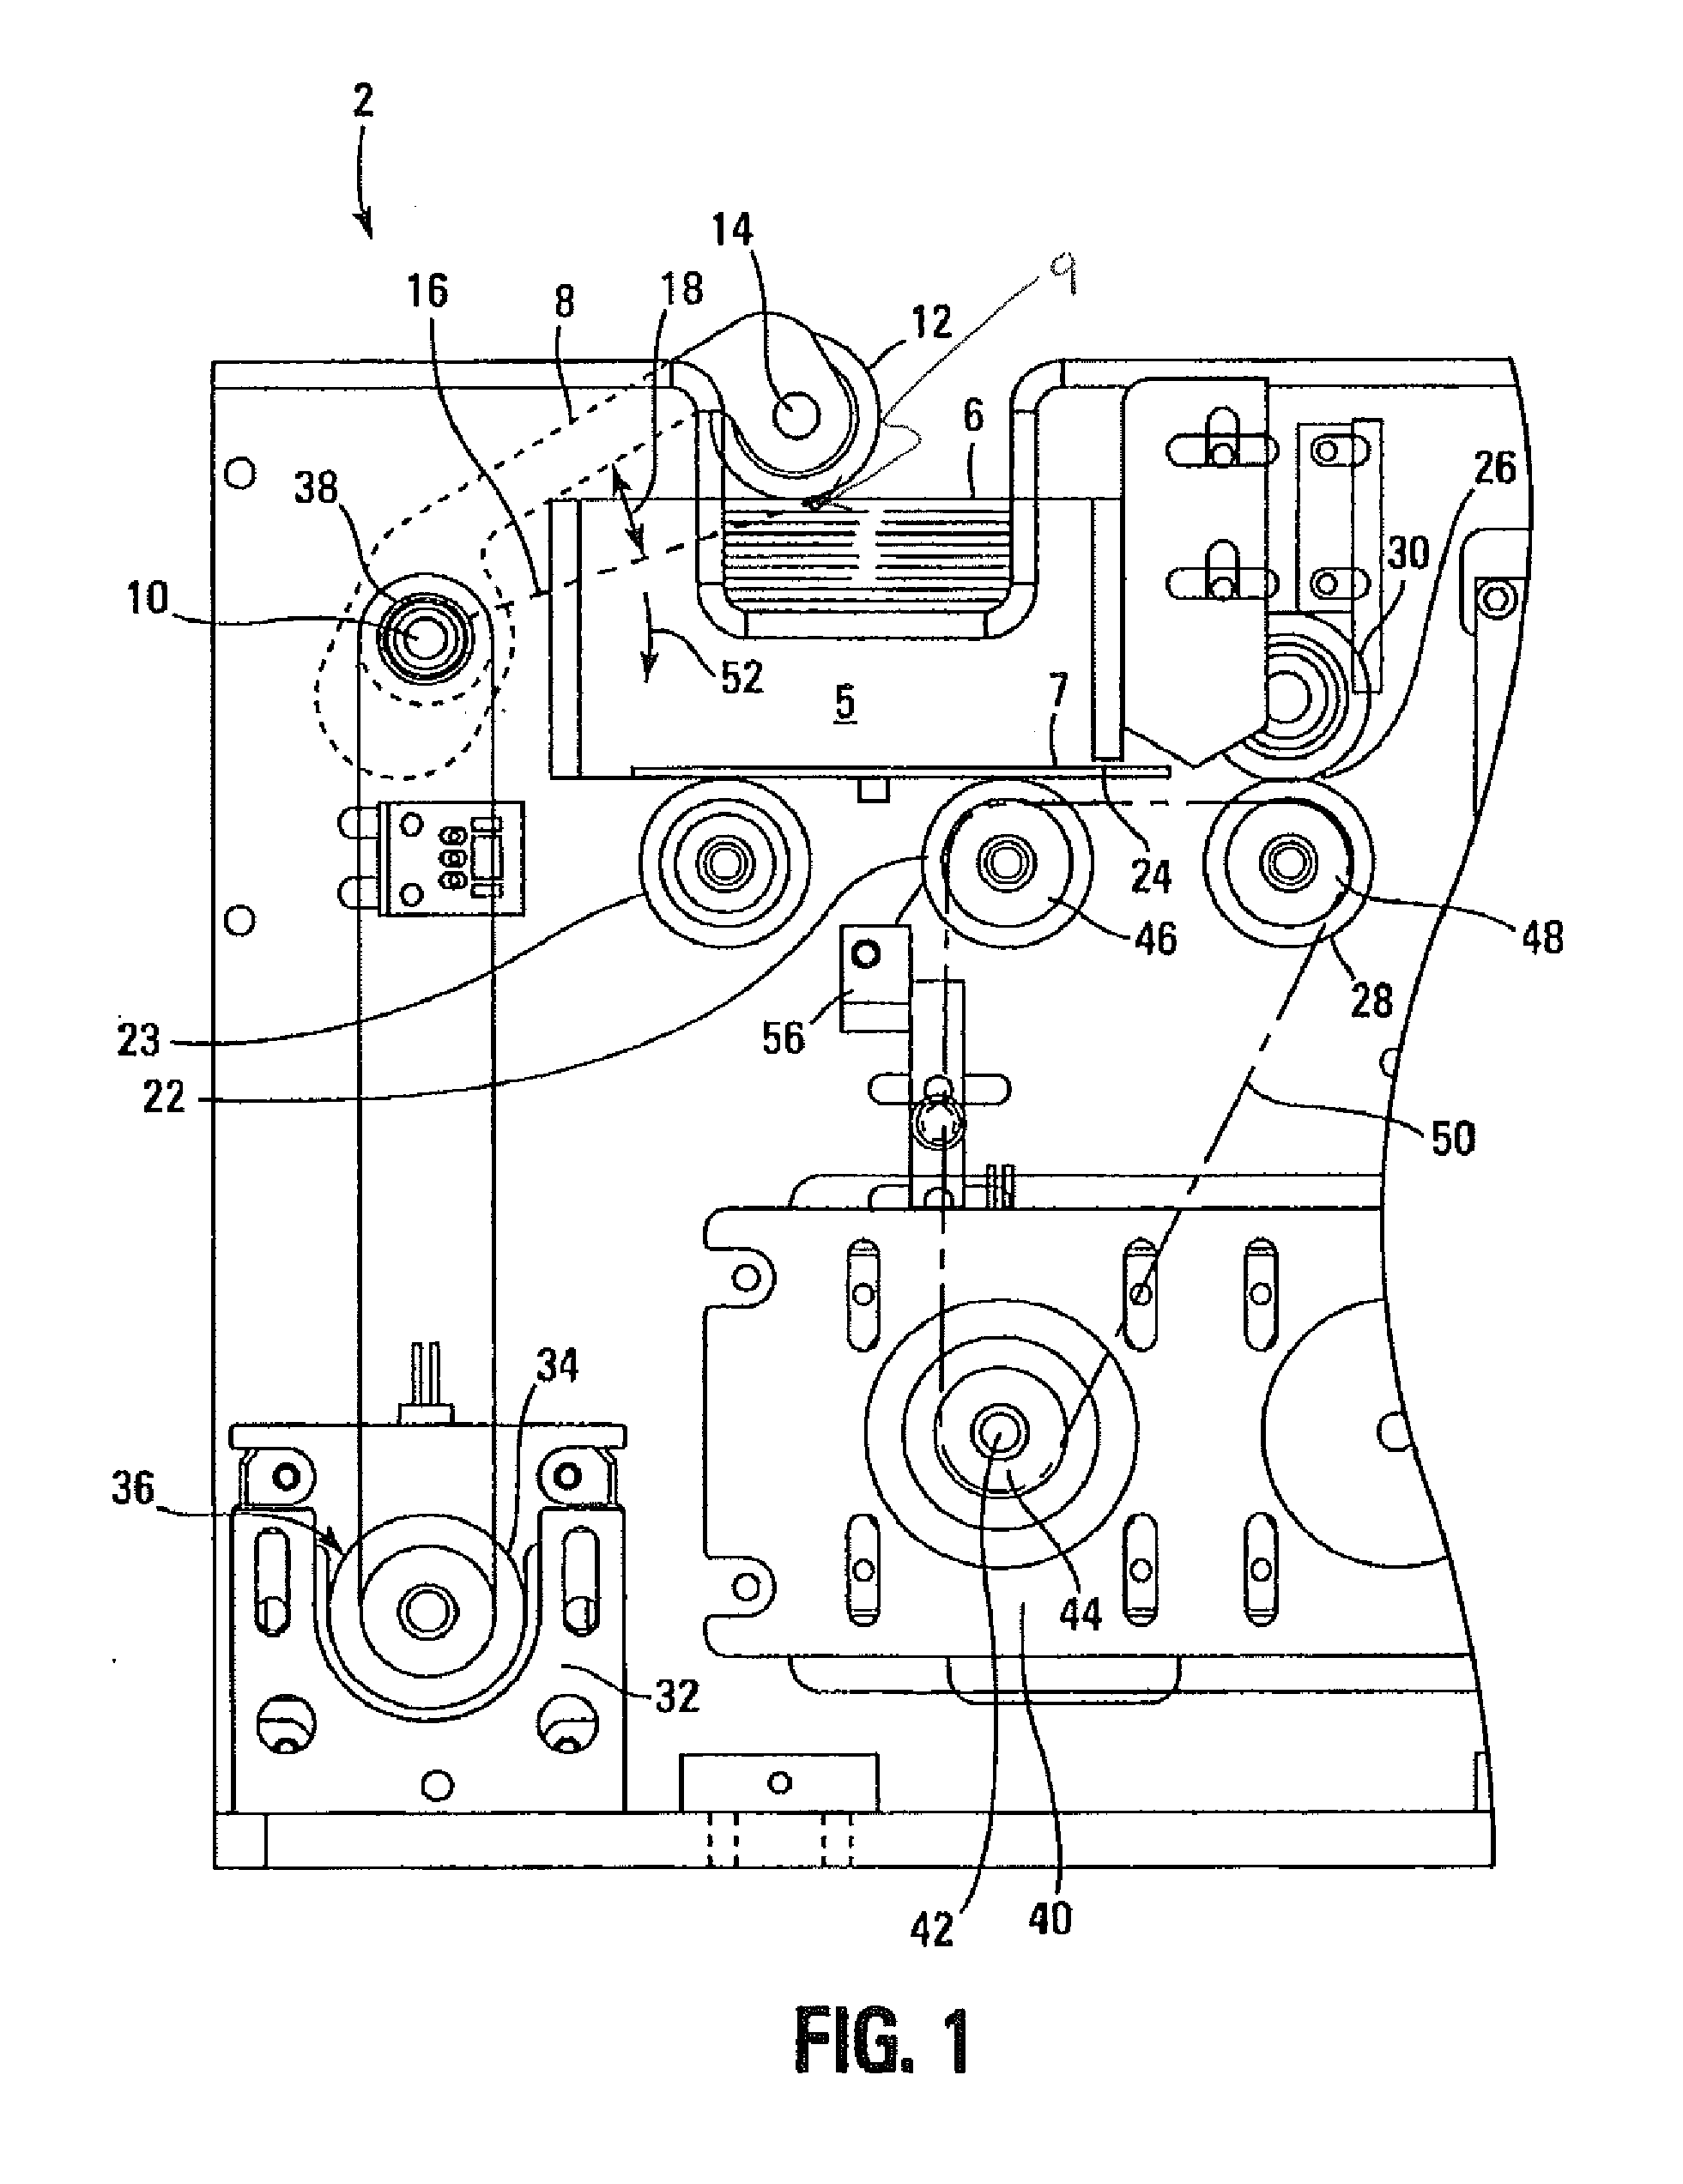 Automatic system and methods for accurate card handling